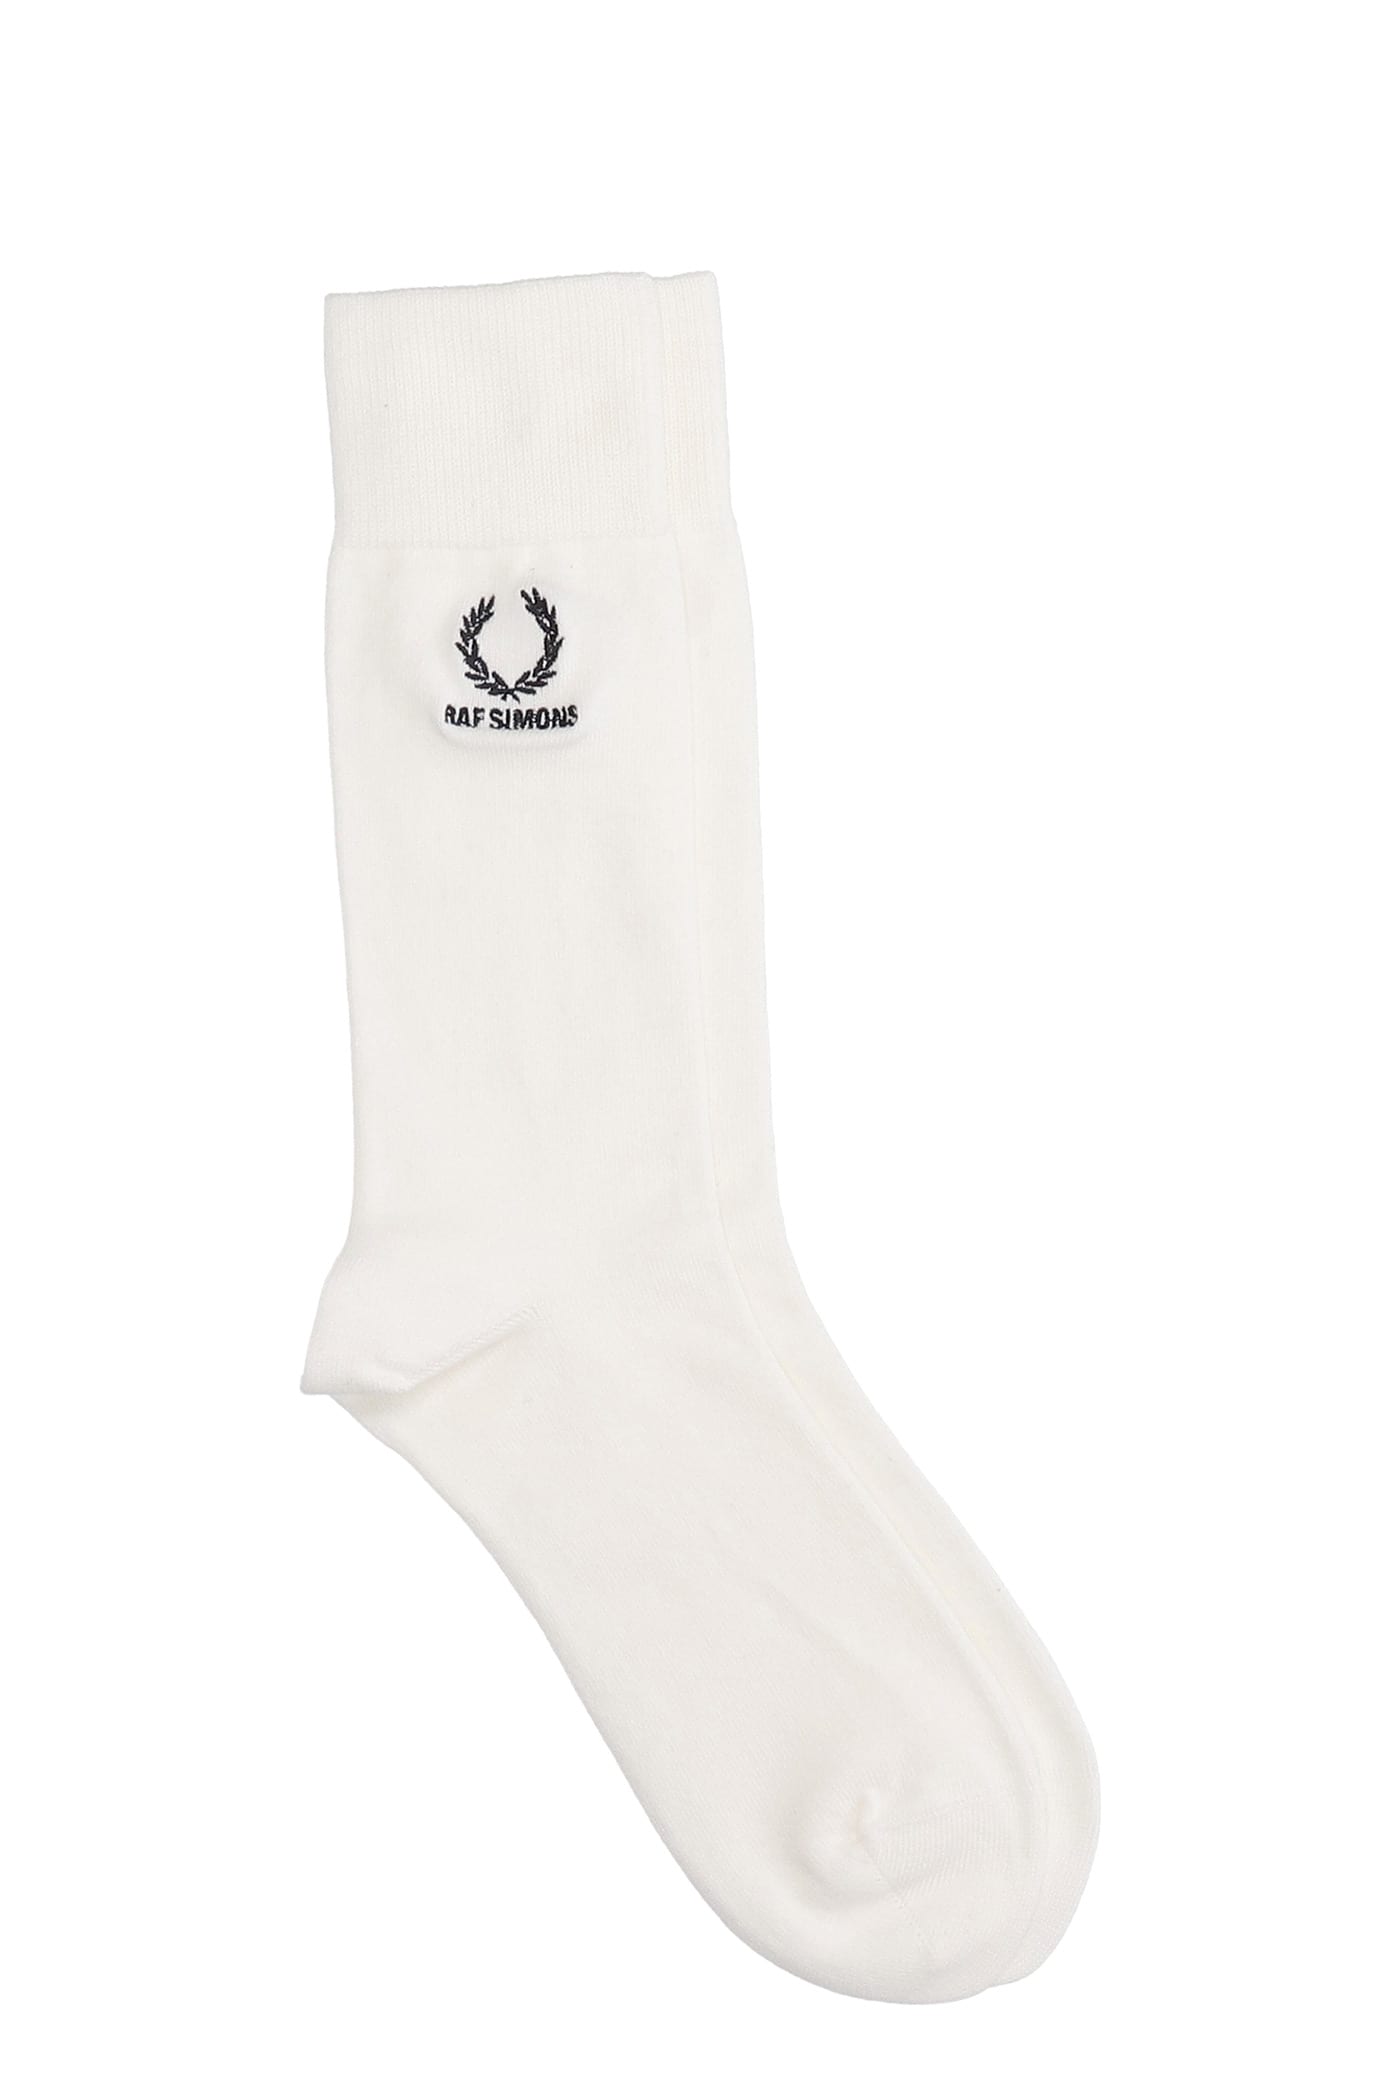 Fred Perry by Raf Simons Socks In White Cotton